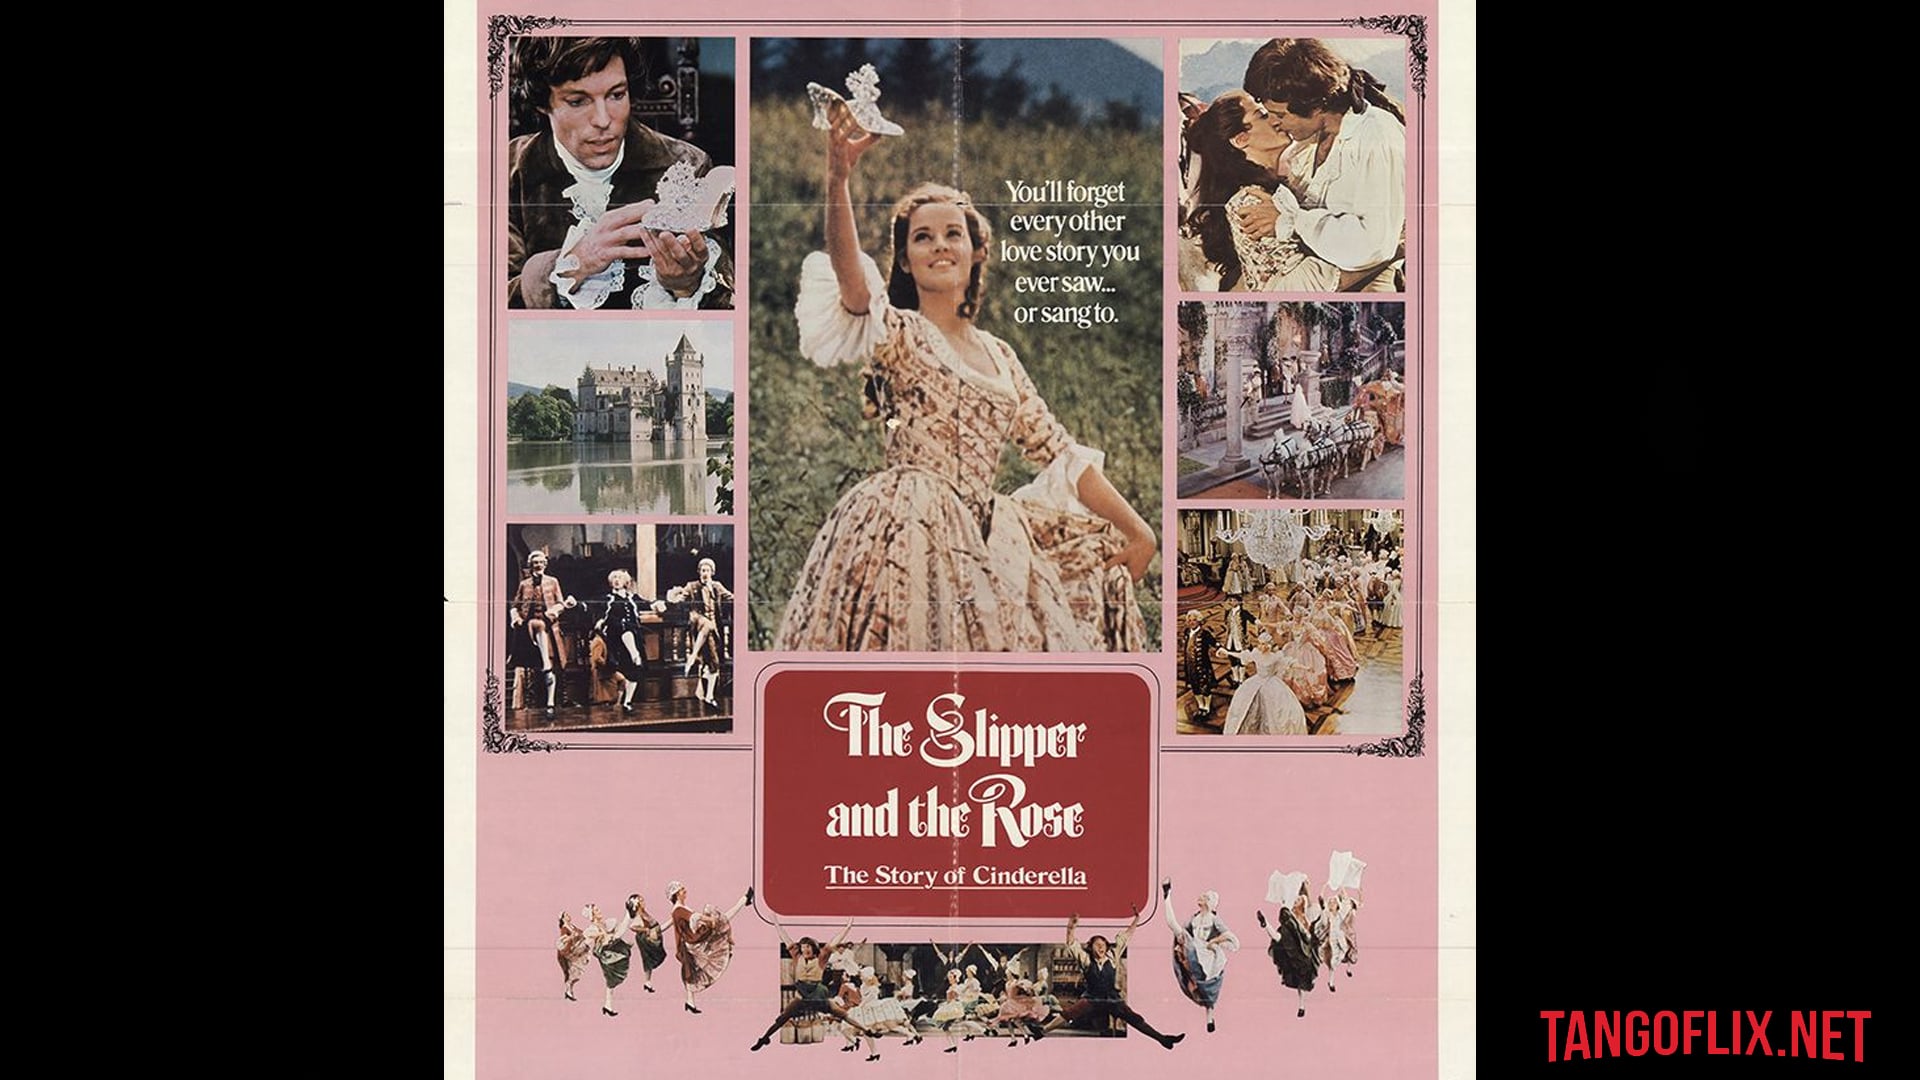 1976 – The Slipper and the Rose The Story of Cinderella